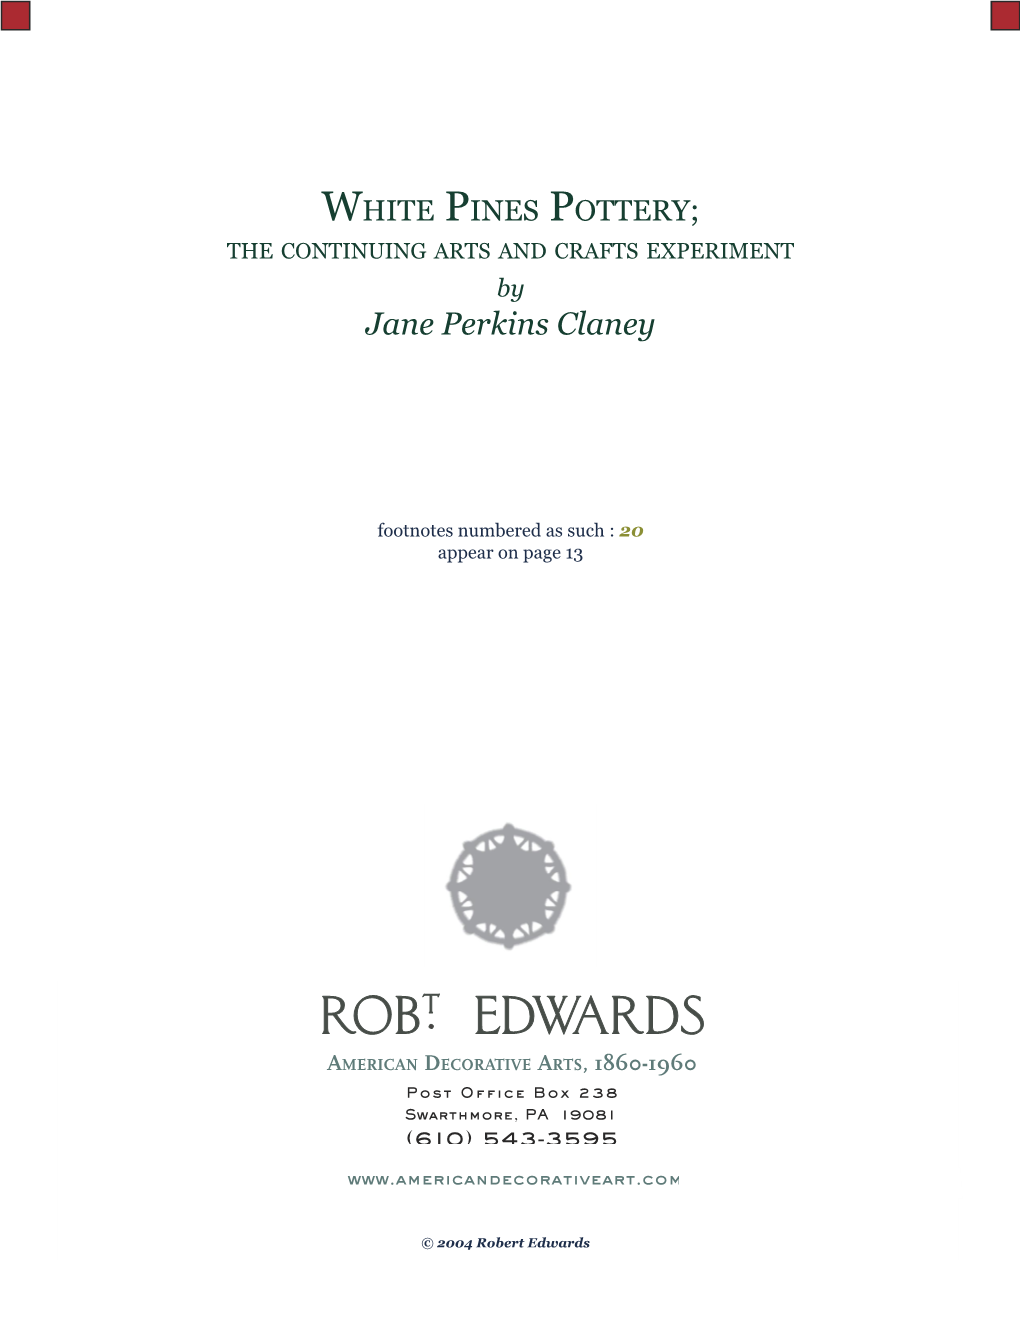 WHITE PINES POTTERY; the CONTINUING ARTS and CRAFTS EXPERIMENT by Jane Perkins Claney